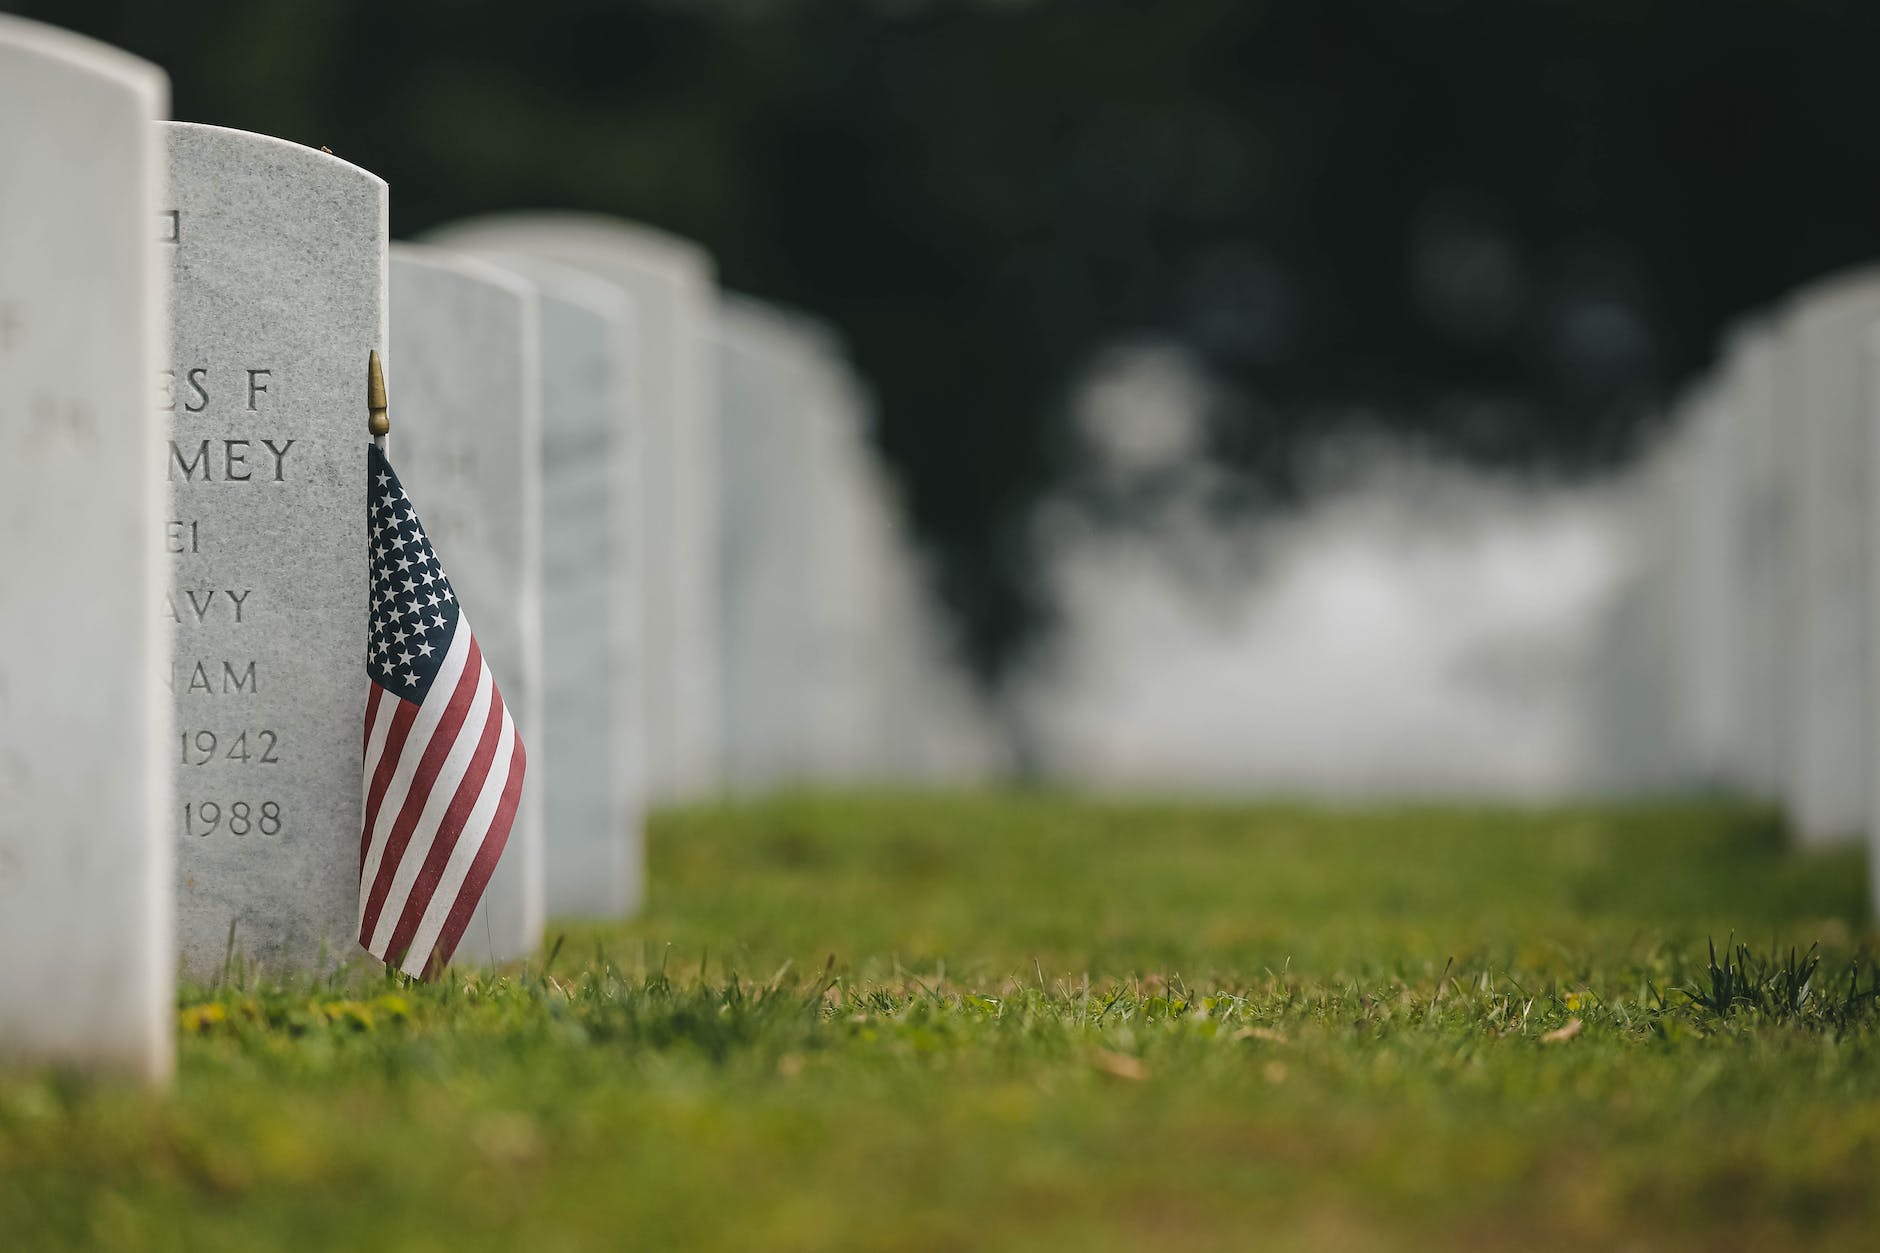 american flag near the tombstone on the green grass